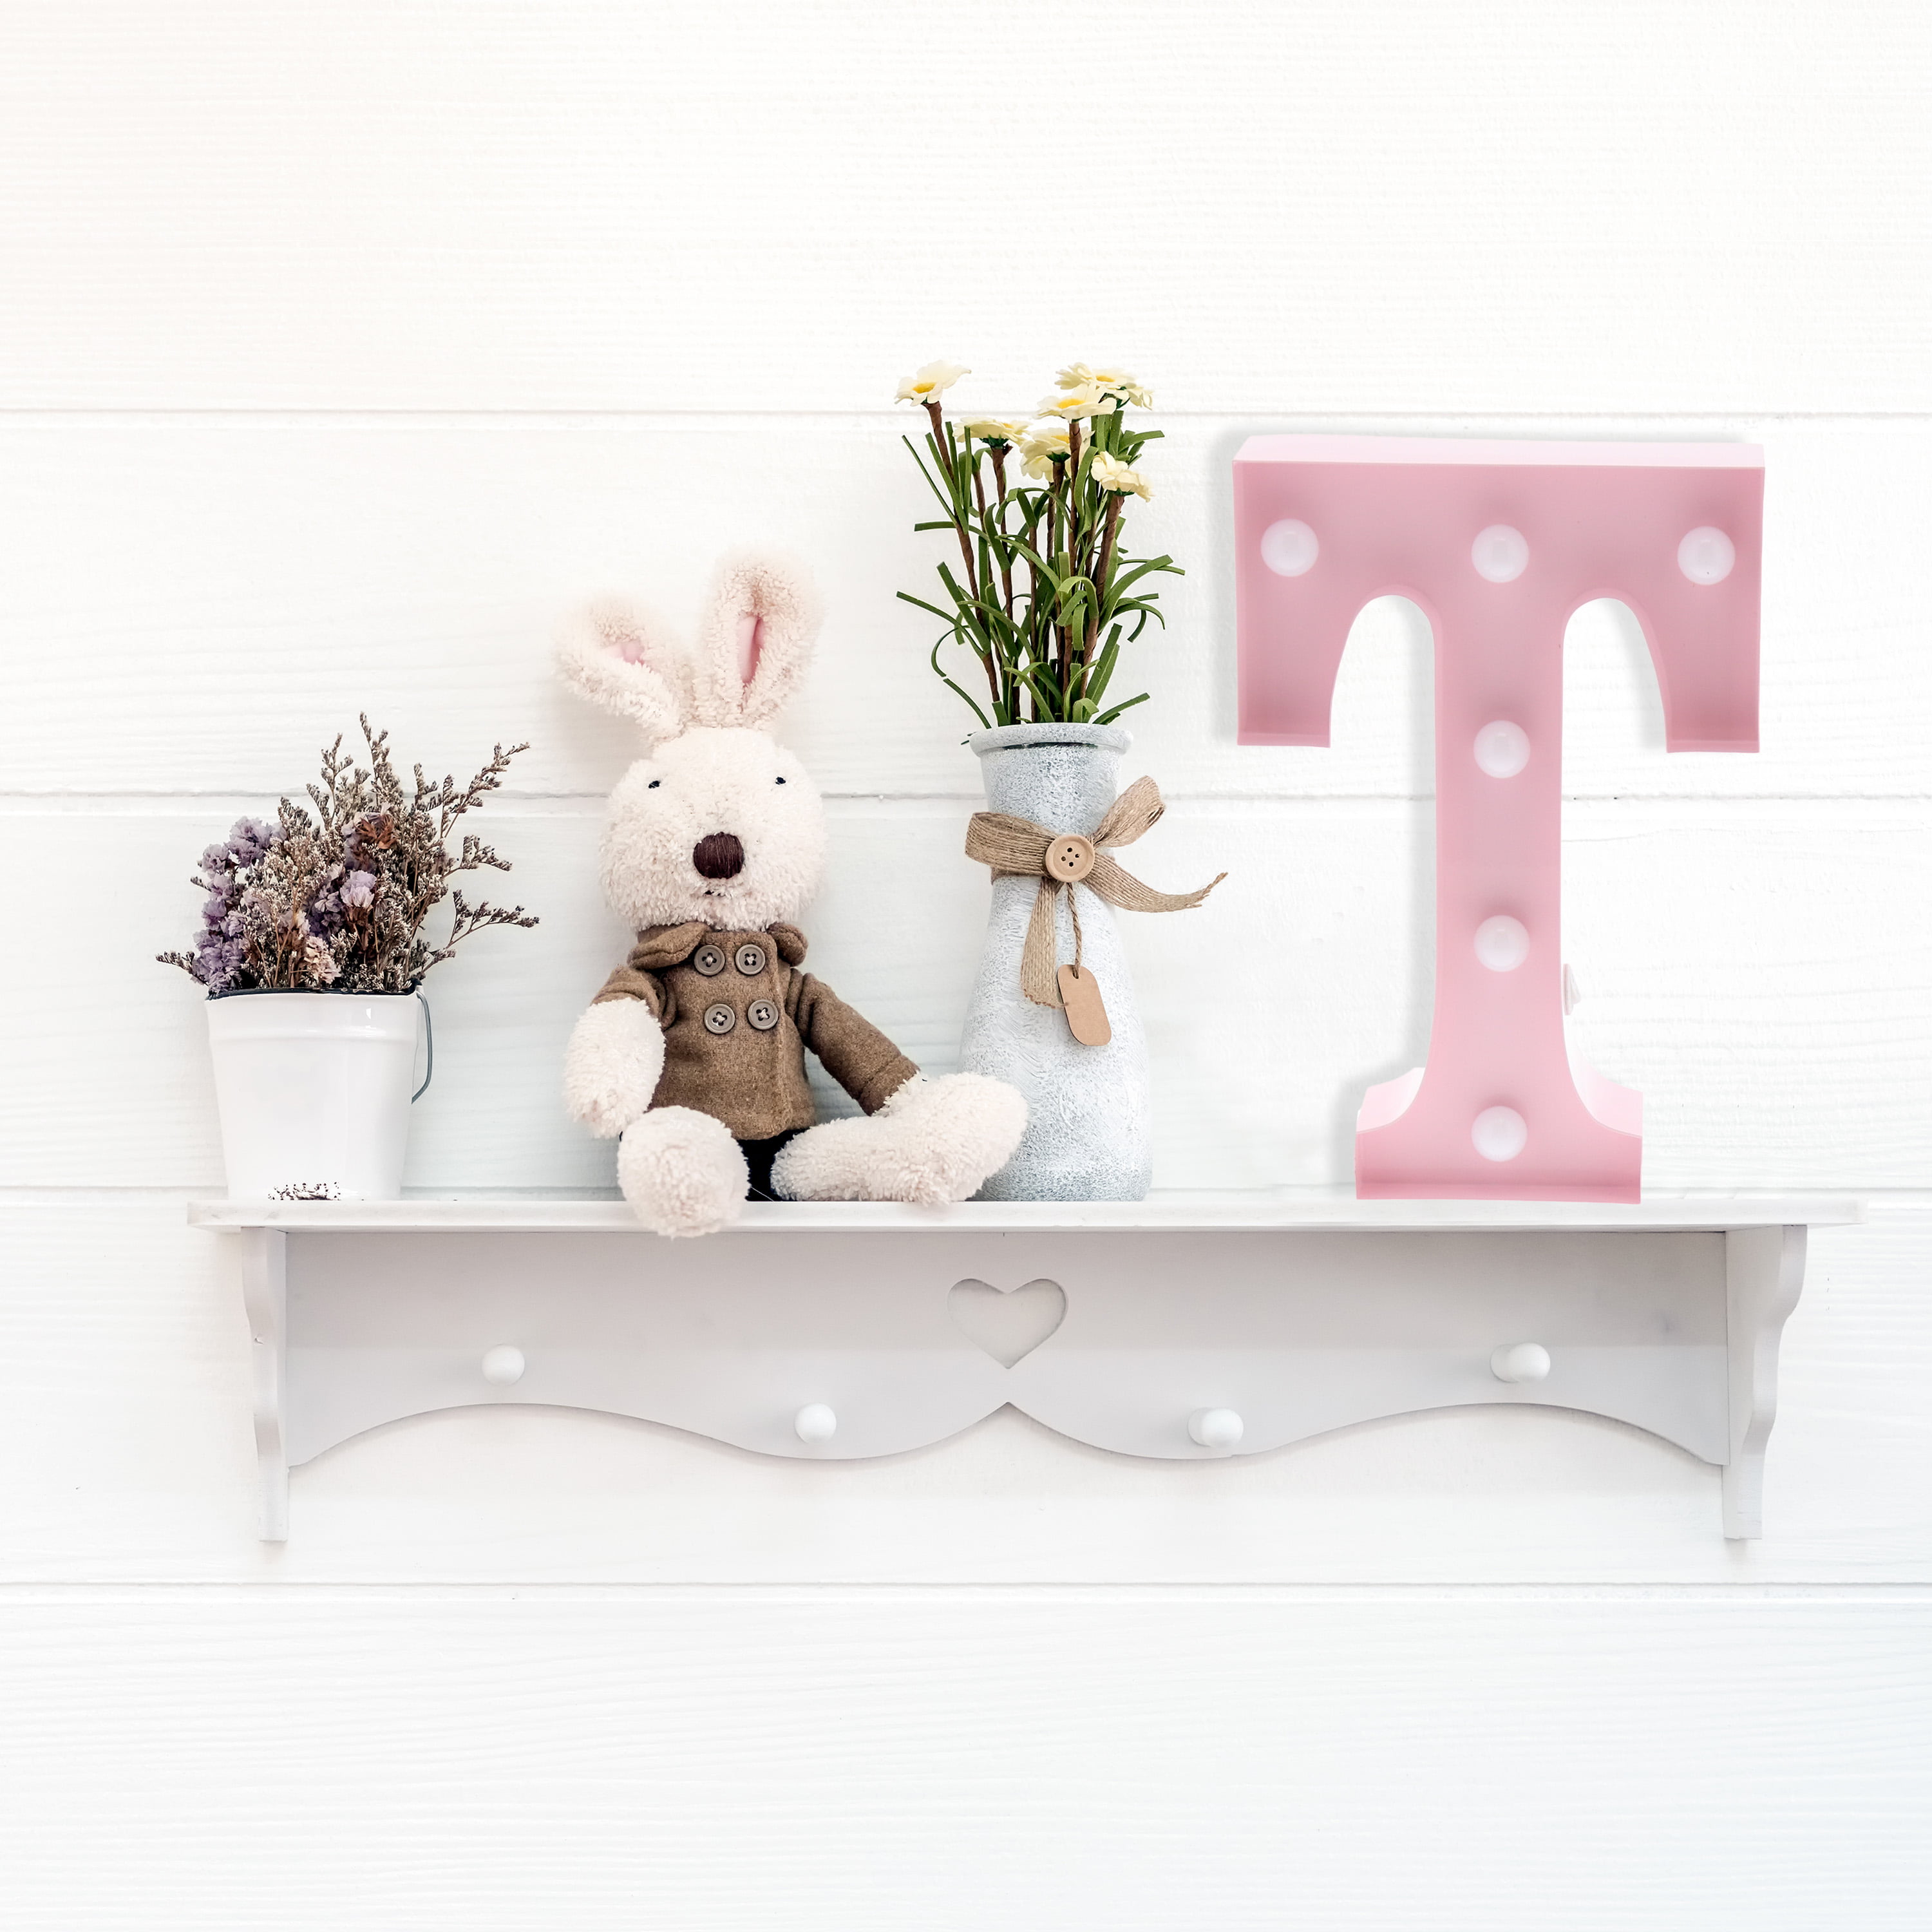 Home and Event Decoration 9” Barnyard Designs Metal Marquee Letter V Light Up Wall Initial Nursery Letter Baby Pink 